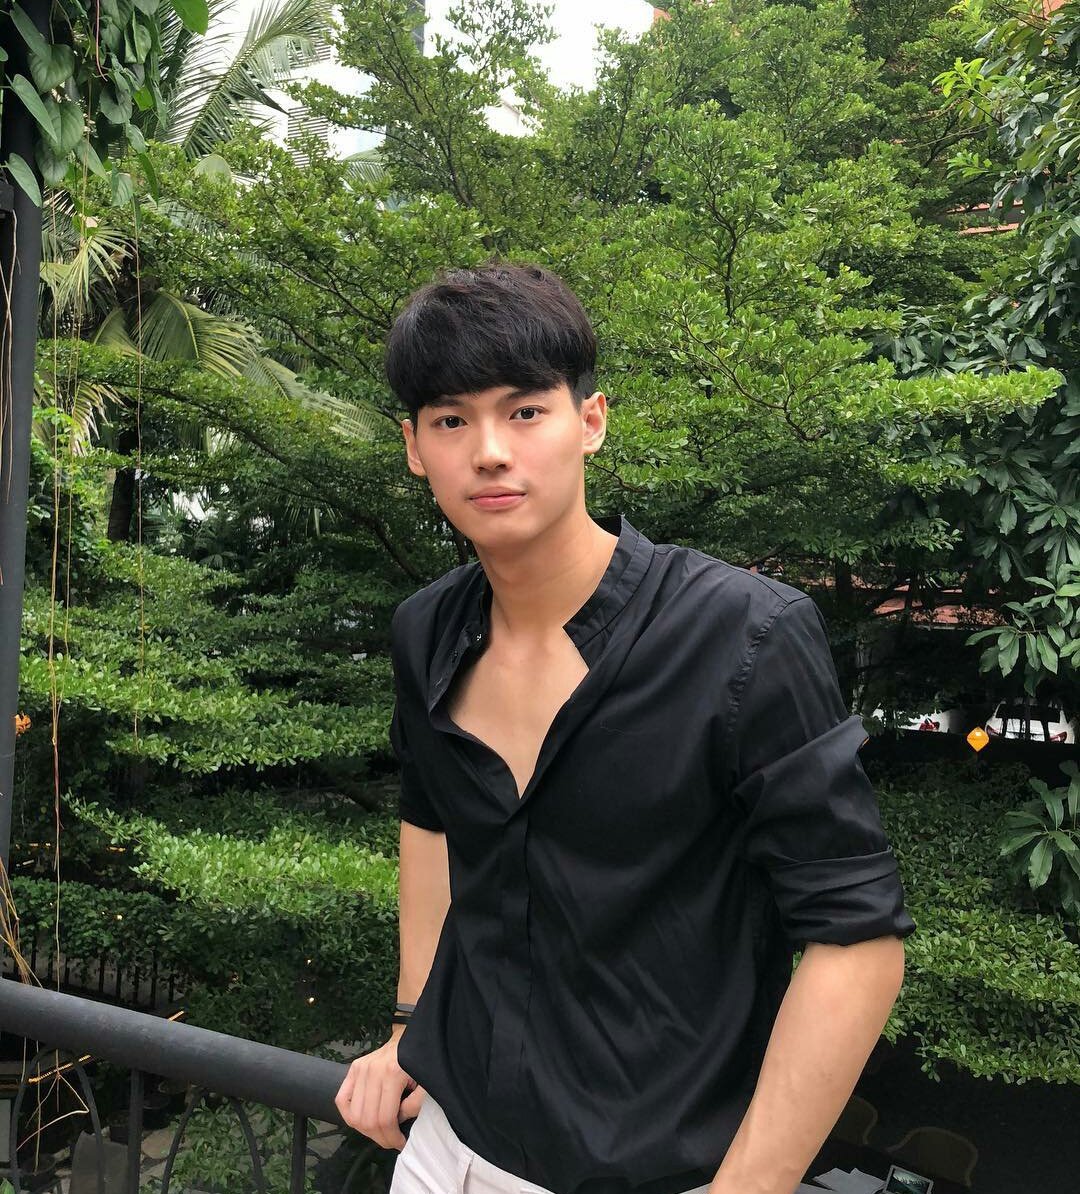 a thread of win metawin but he gets older as you keep scrolling: